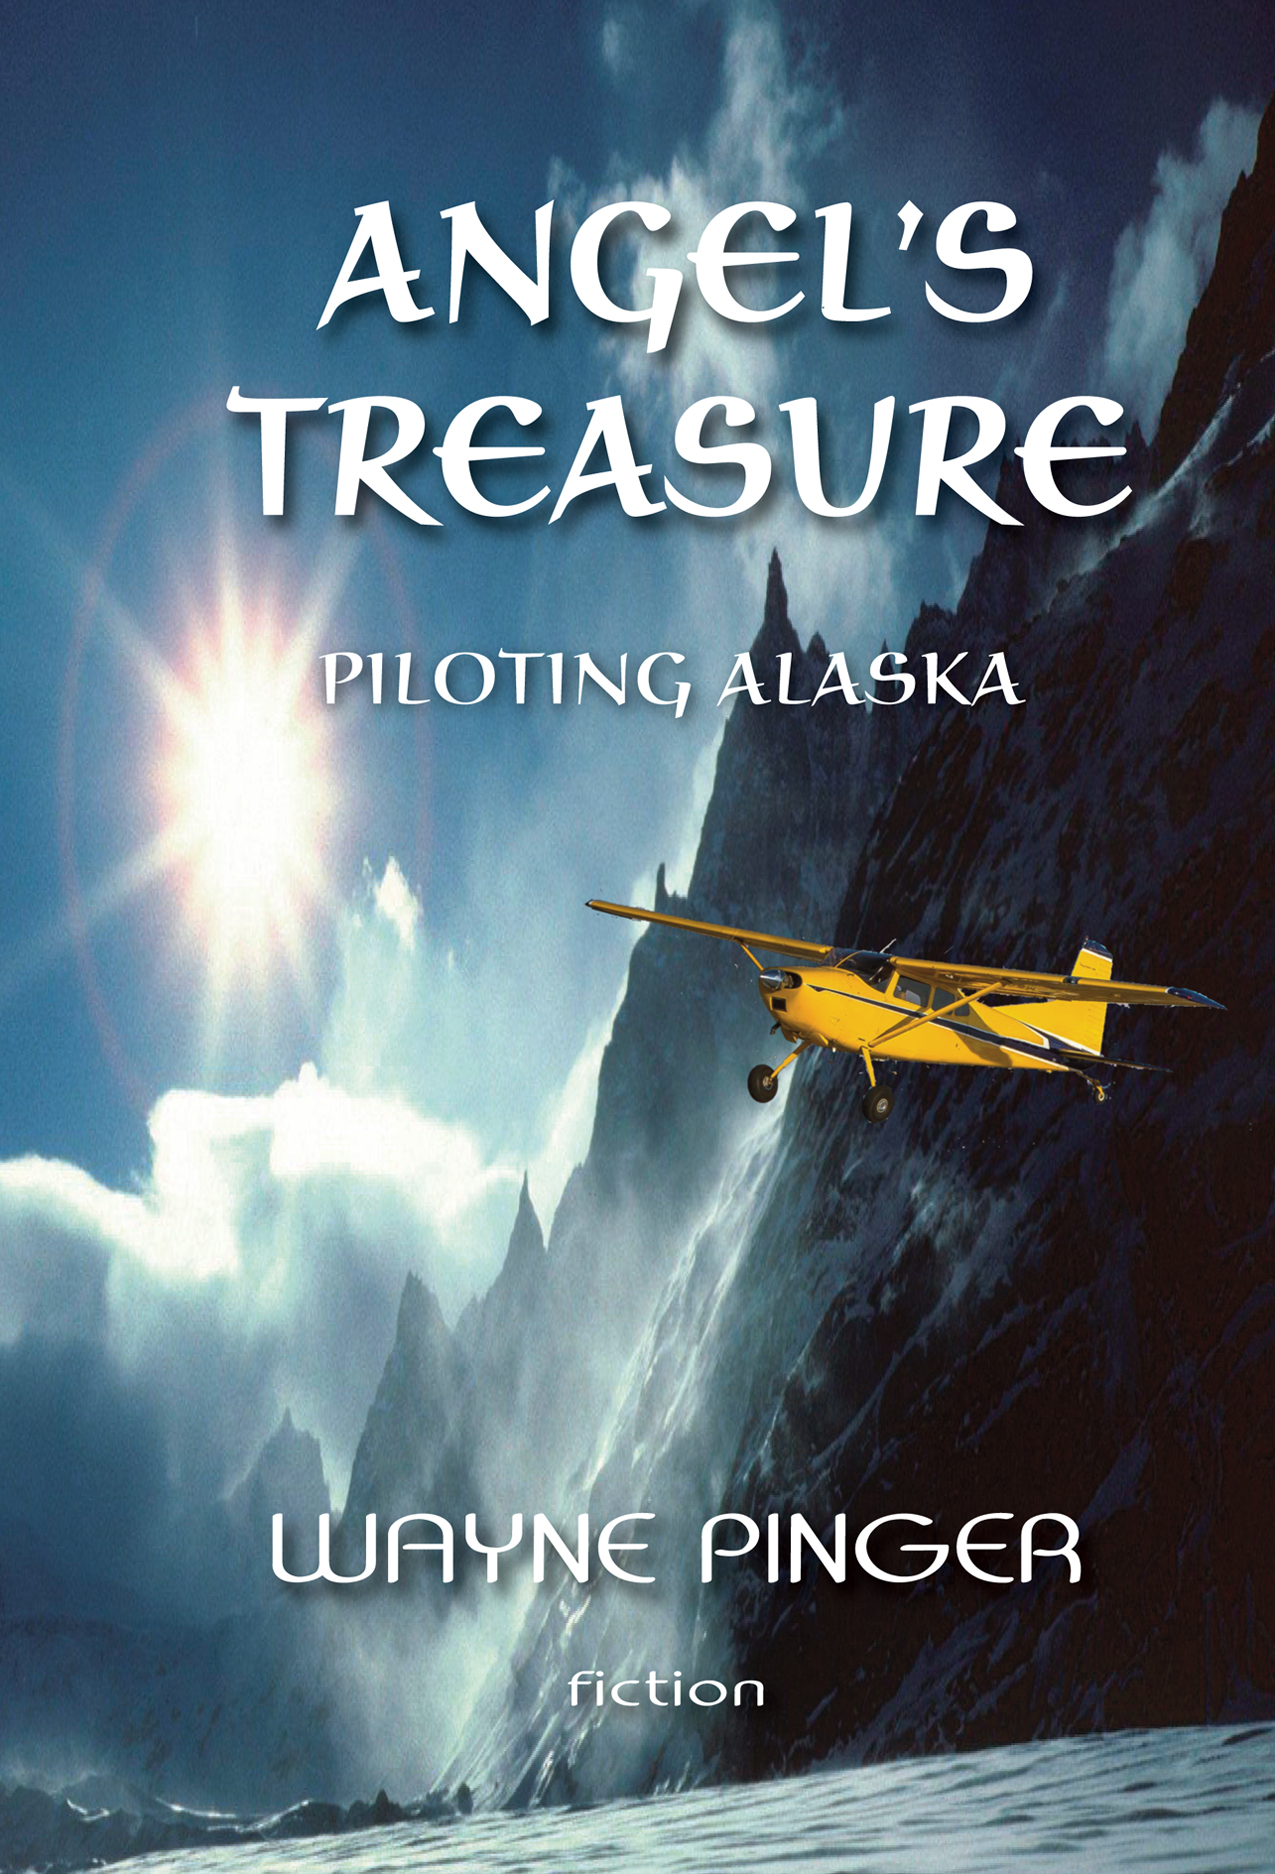 The Second in the Angels in Alaska Series, by Wayne Pinger, from Firefallmedia